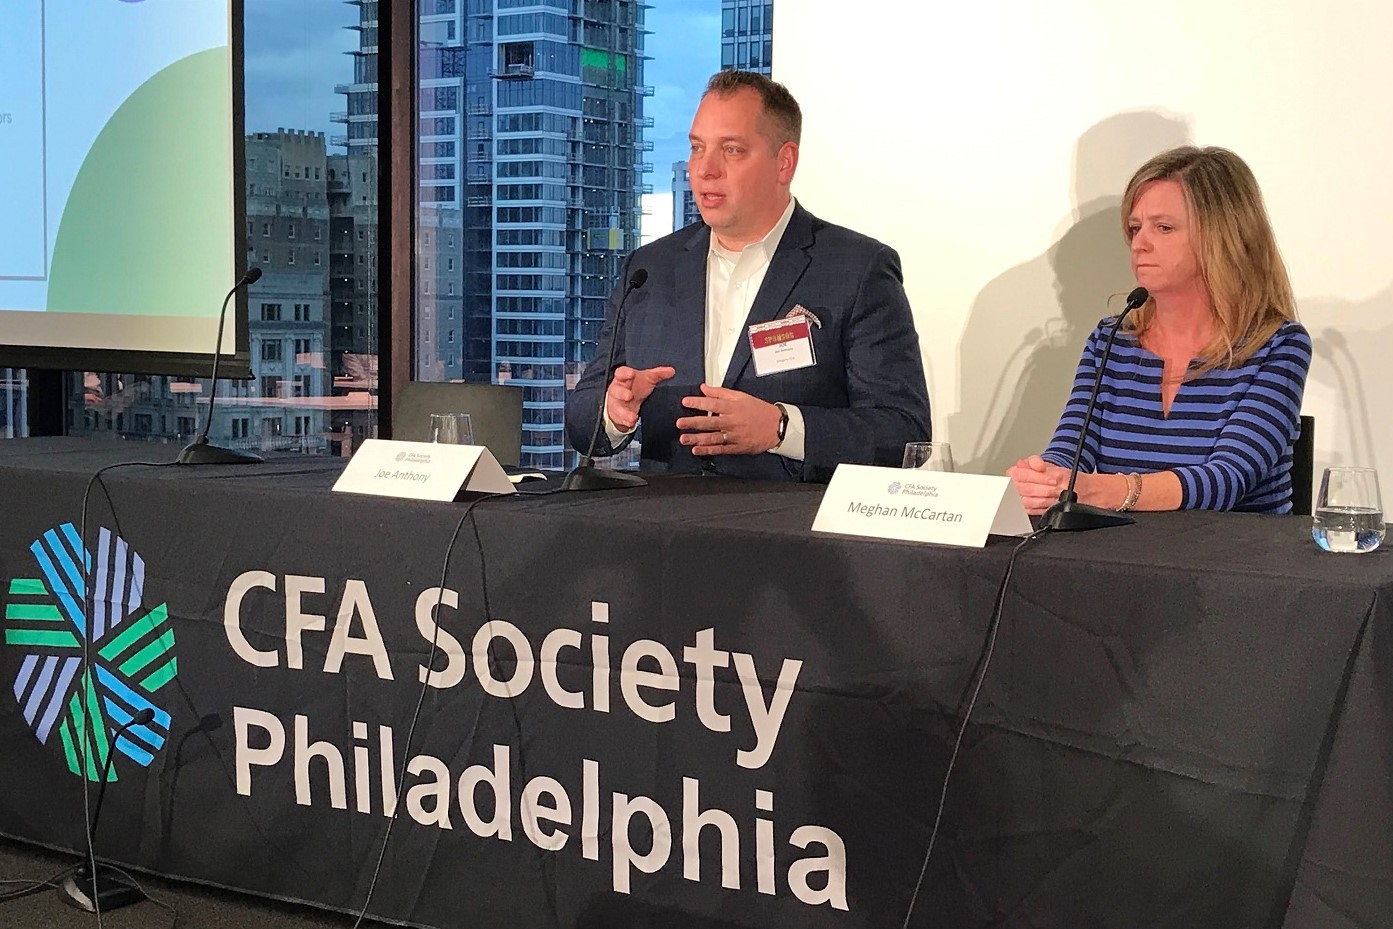 CFA Society event addresses pressing financial industry issues and features Gregory FCA’s Joe Anthony as panelist